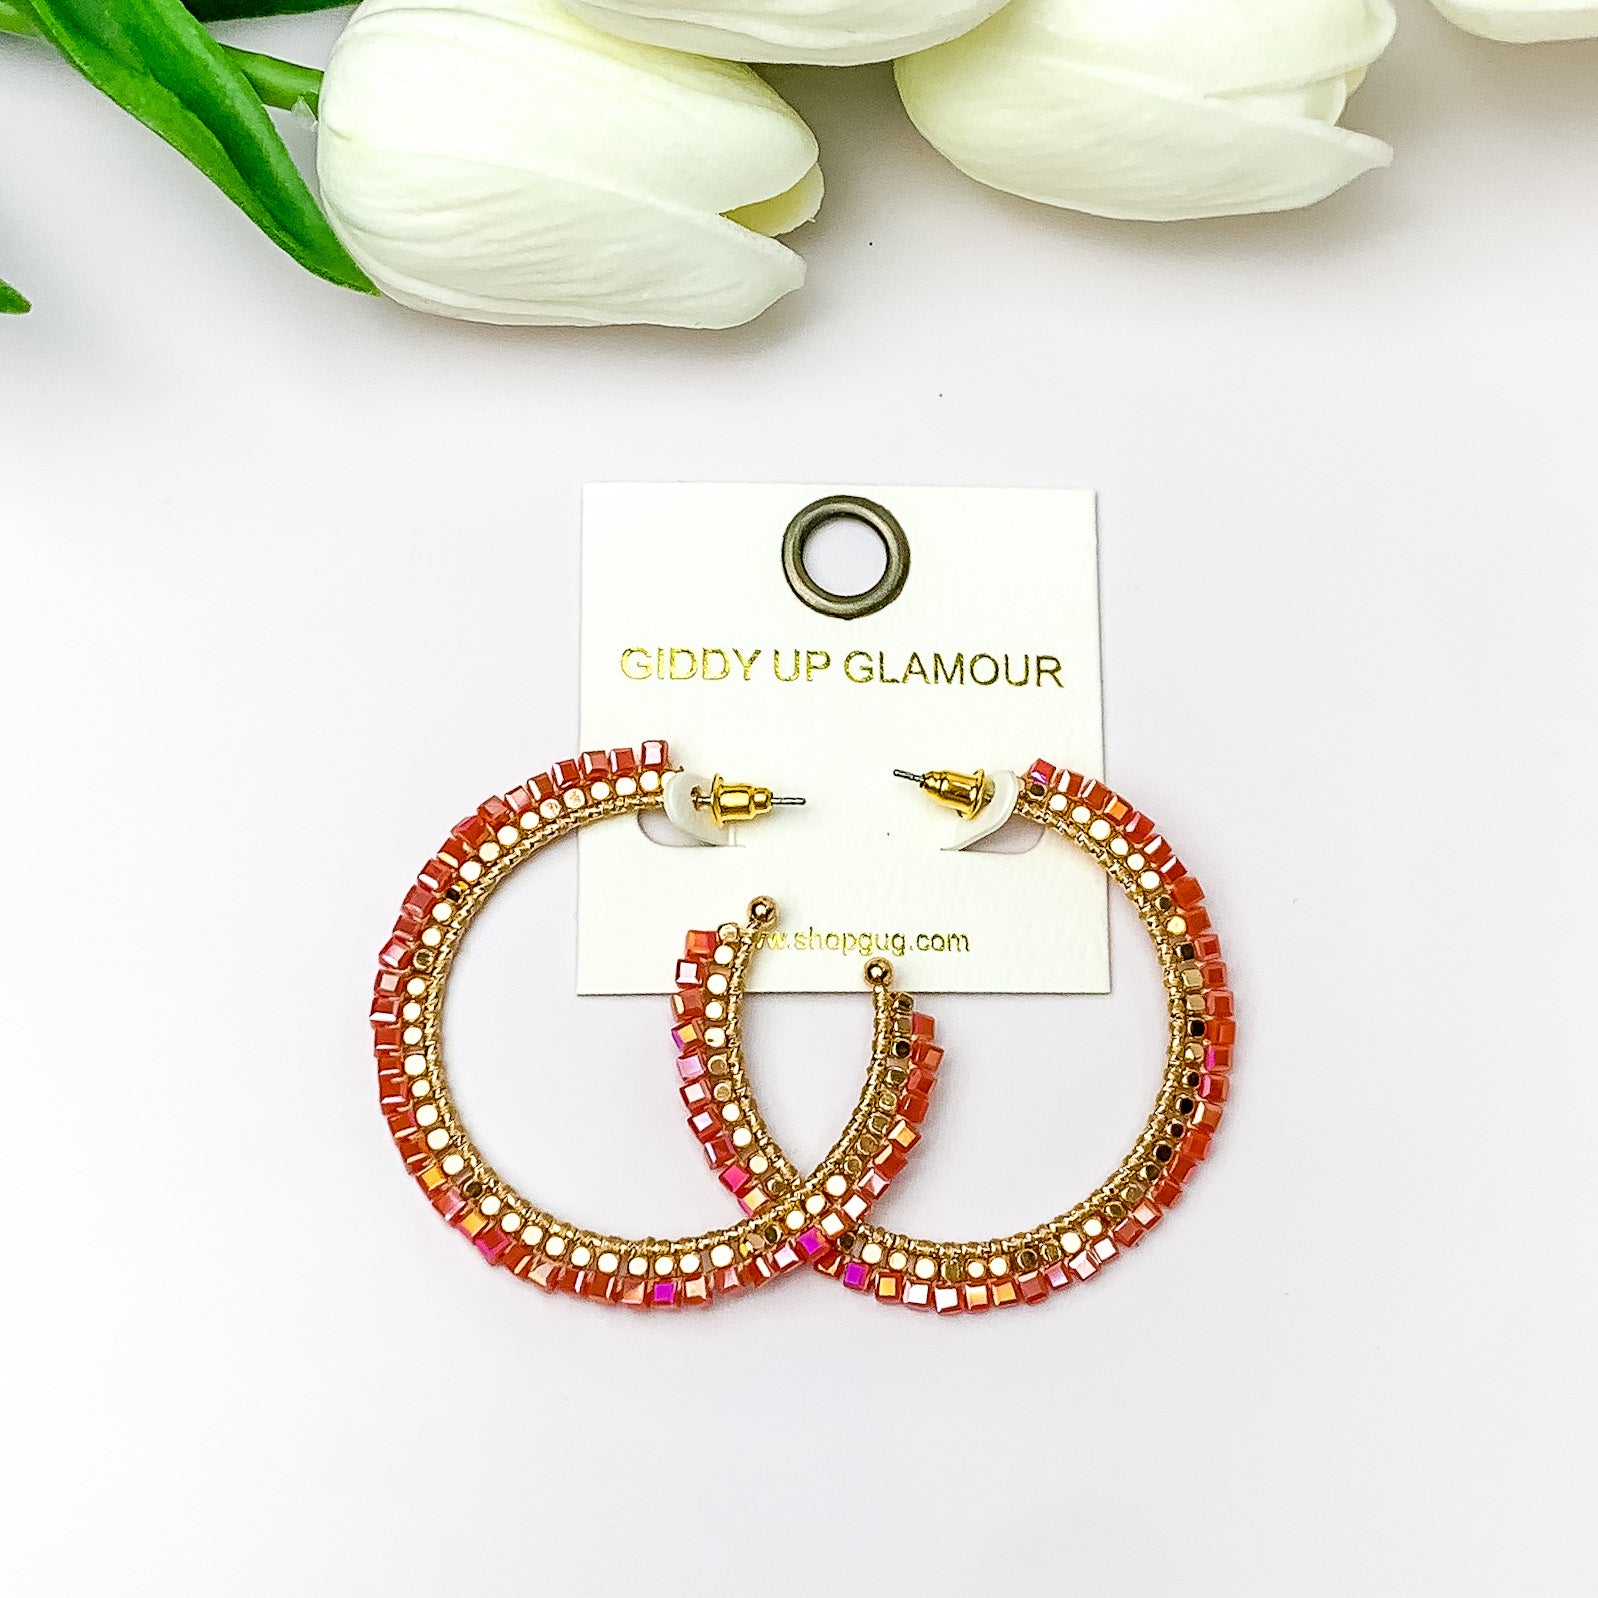  Pictured are circle gold toned hoop earrings with gold beads around it and a red orange crystal outline. They are pictured with white flowers on a white background.